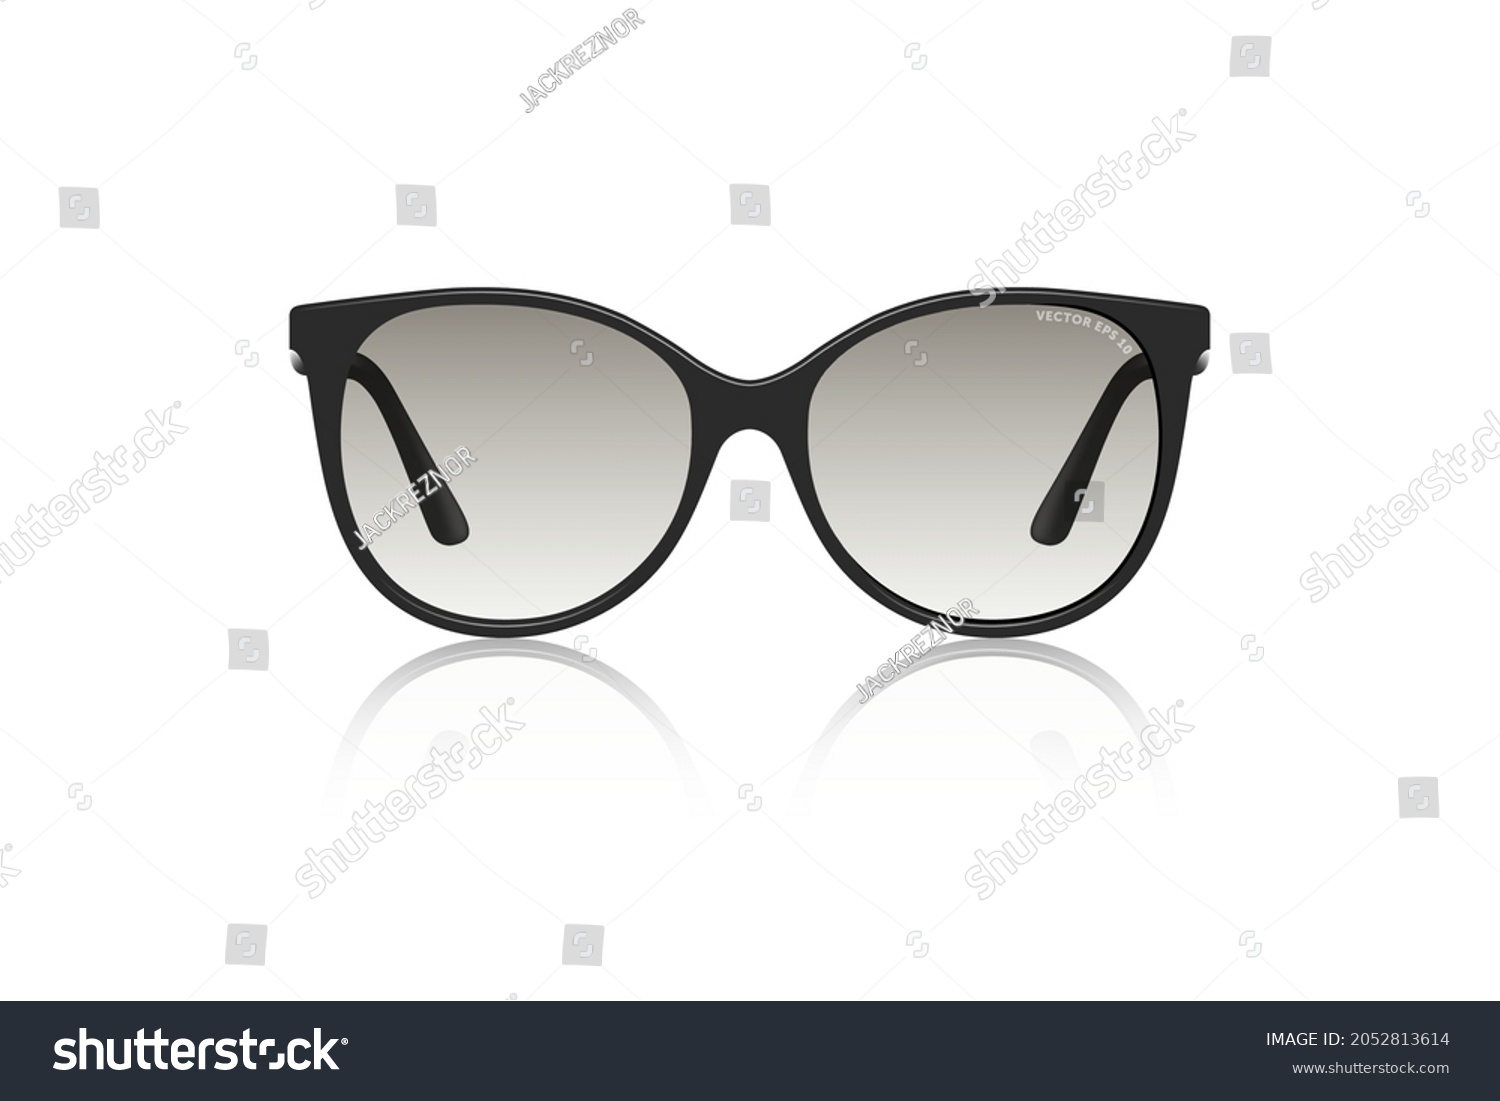 Realistic Illustration Sunglasses Isolated On White Stock Vector Royalty Free 2052813614